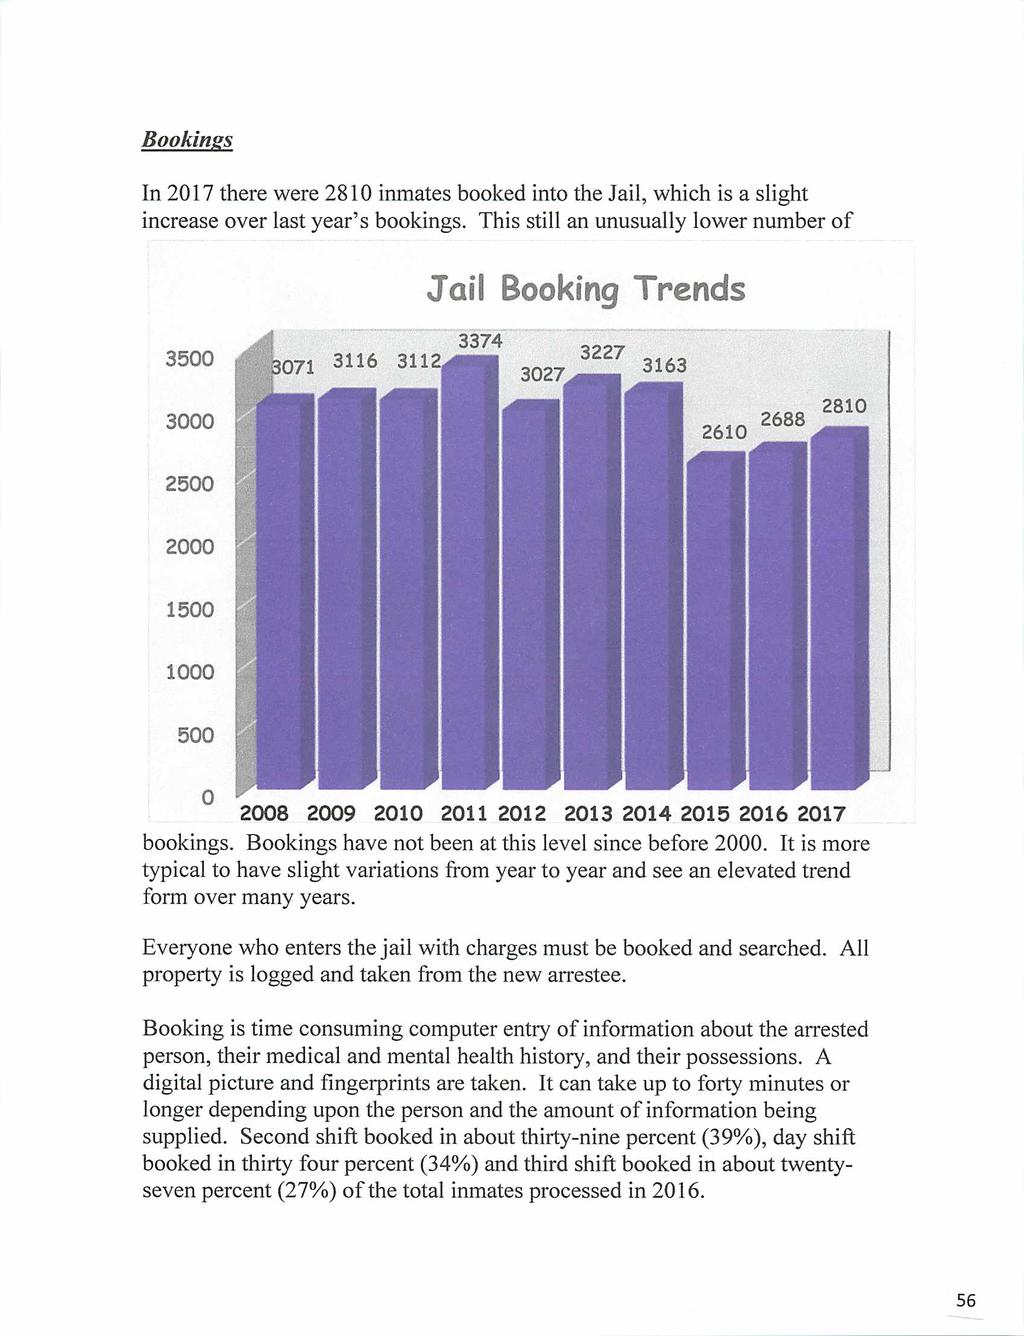 Bookings In 2017 there were 2810 inmates booked into the Jail, which is a slight increase over last year's bookings.